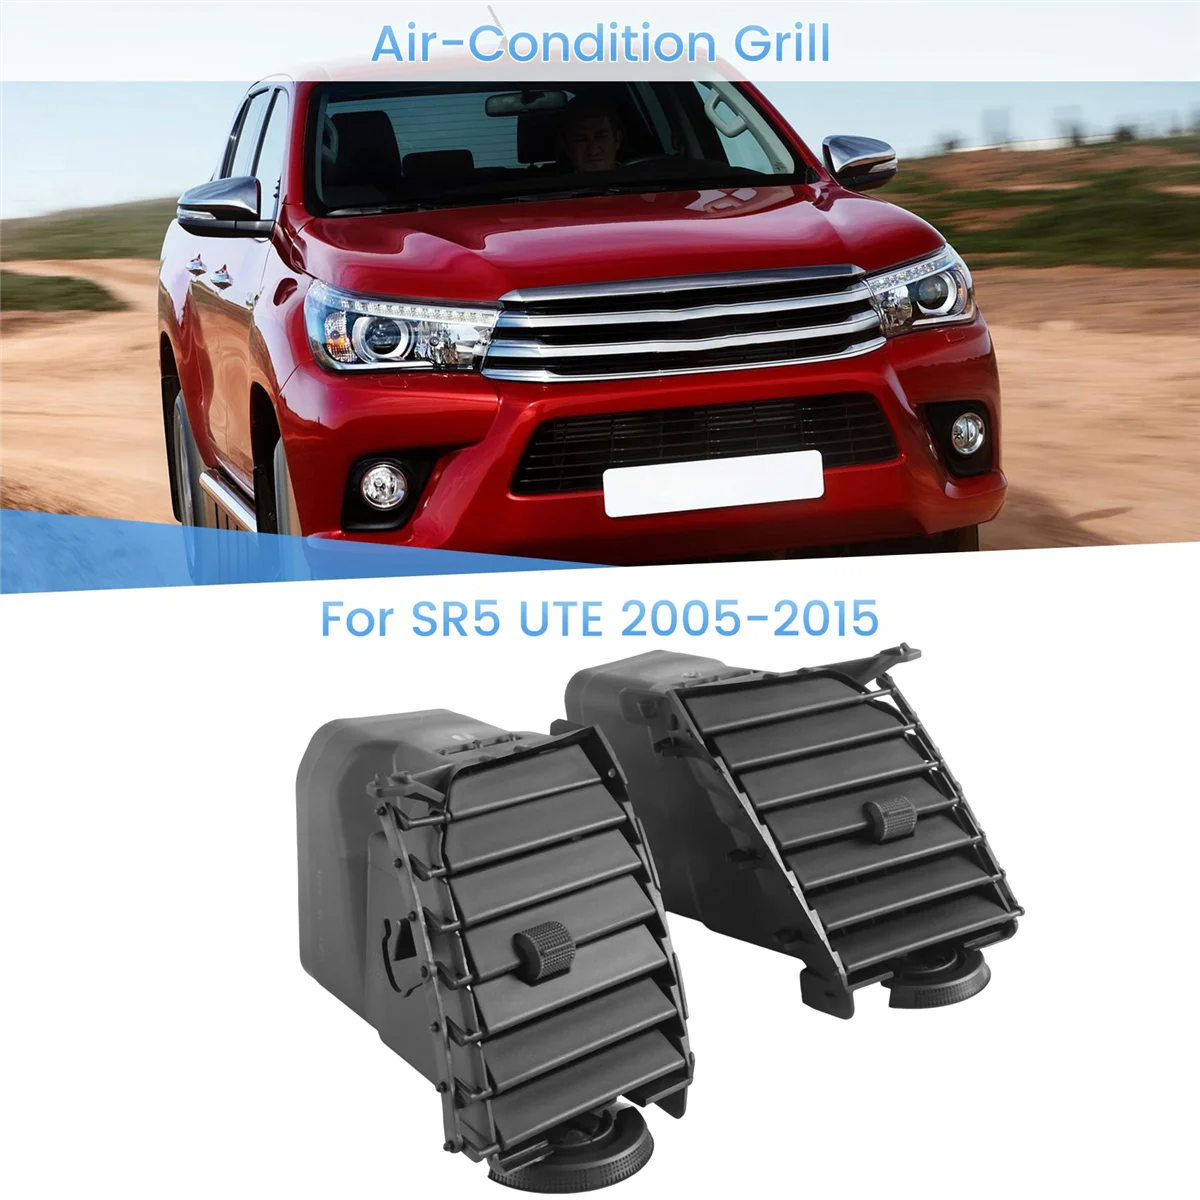 

2x Interior Air-Condition Grill A/C Vent Grille for Toyota Hilux Kun SR5 UTE 2005-2015 Fortuner Accessories